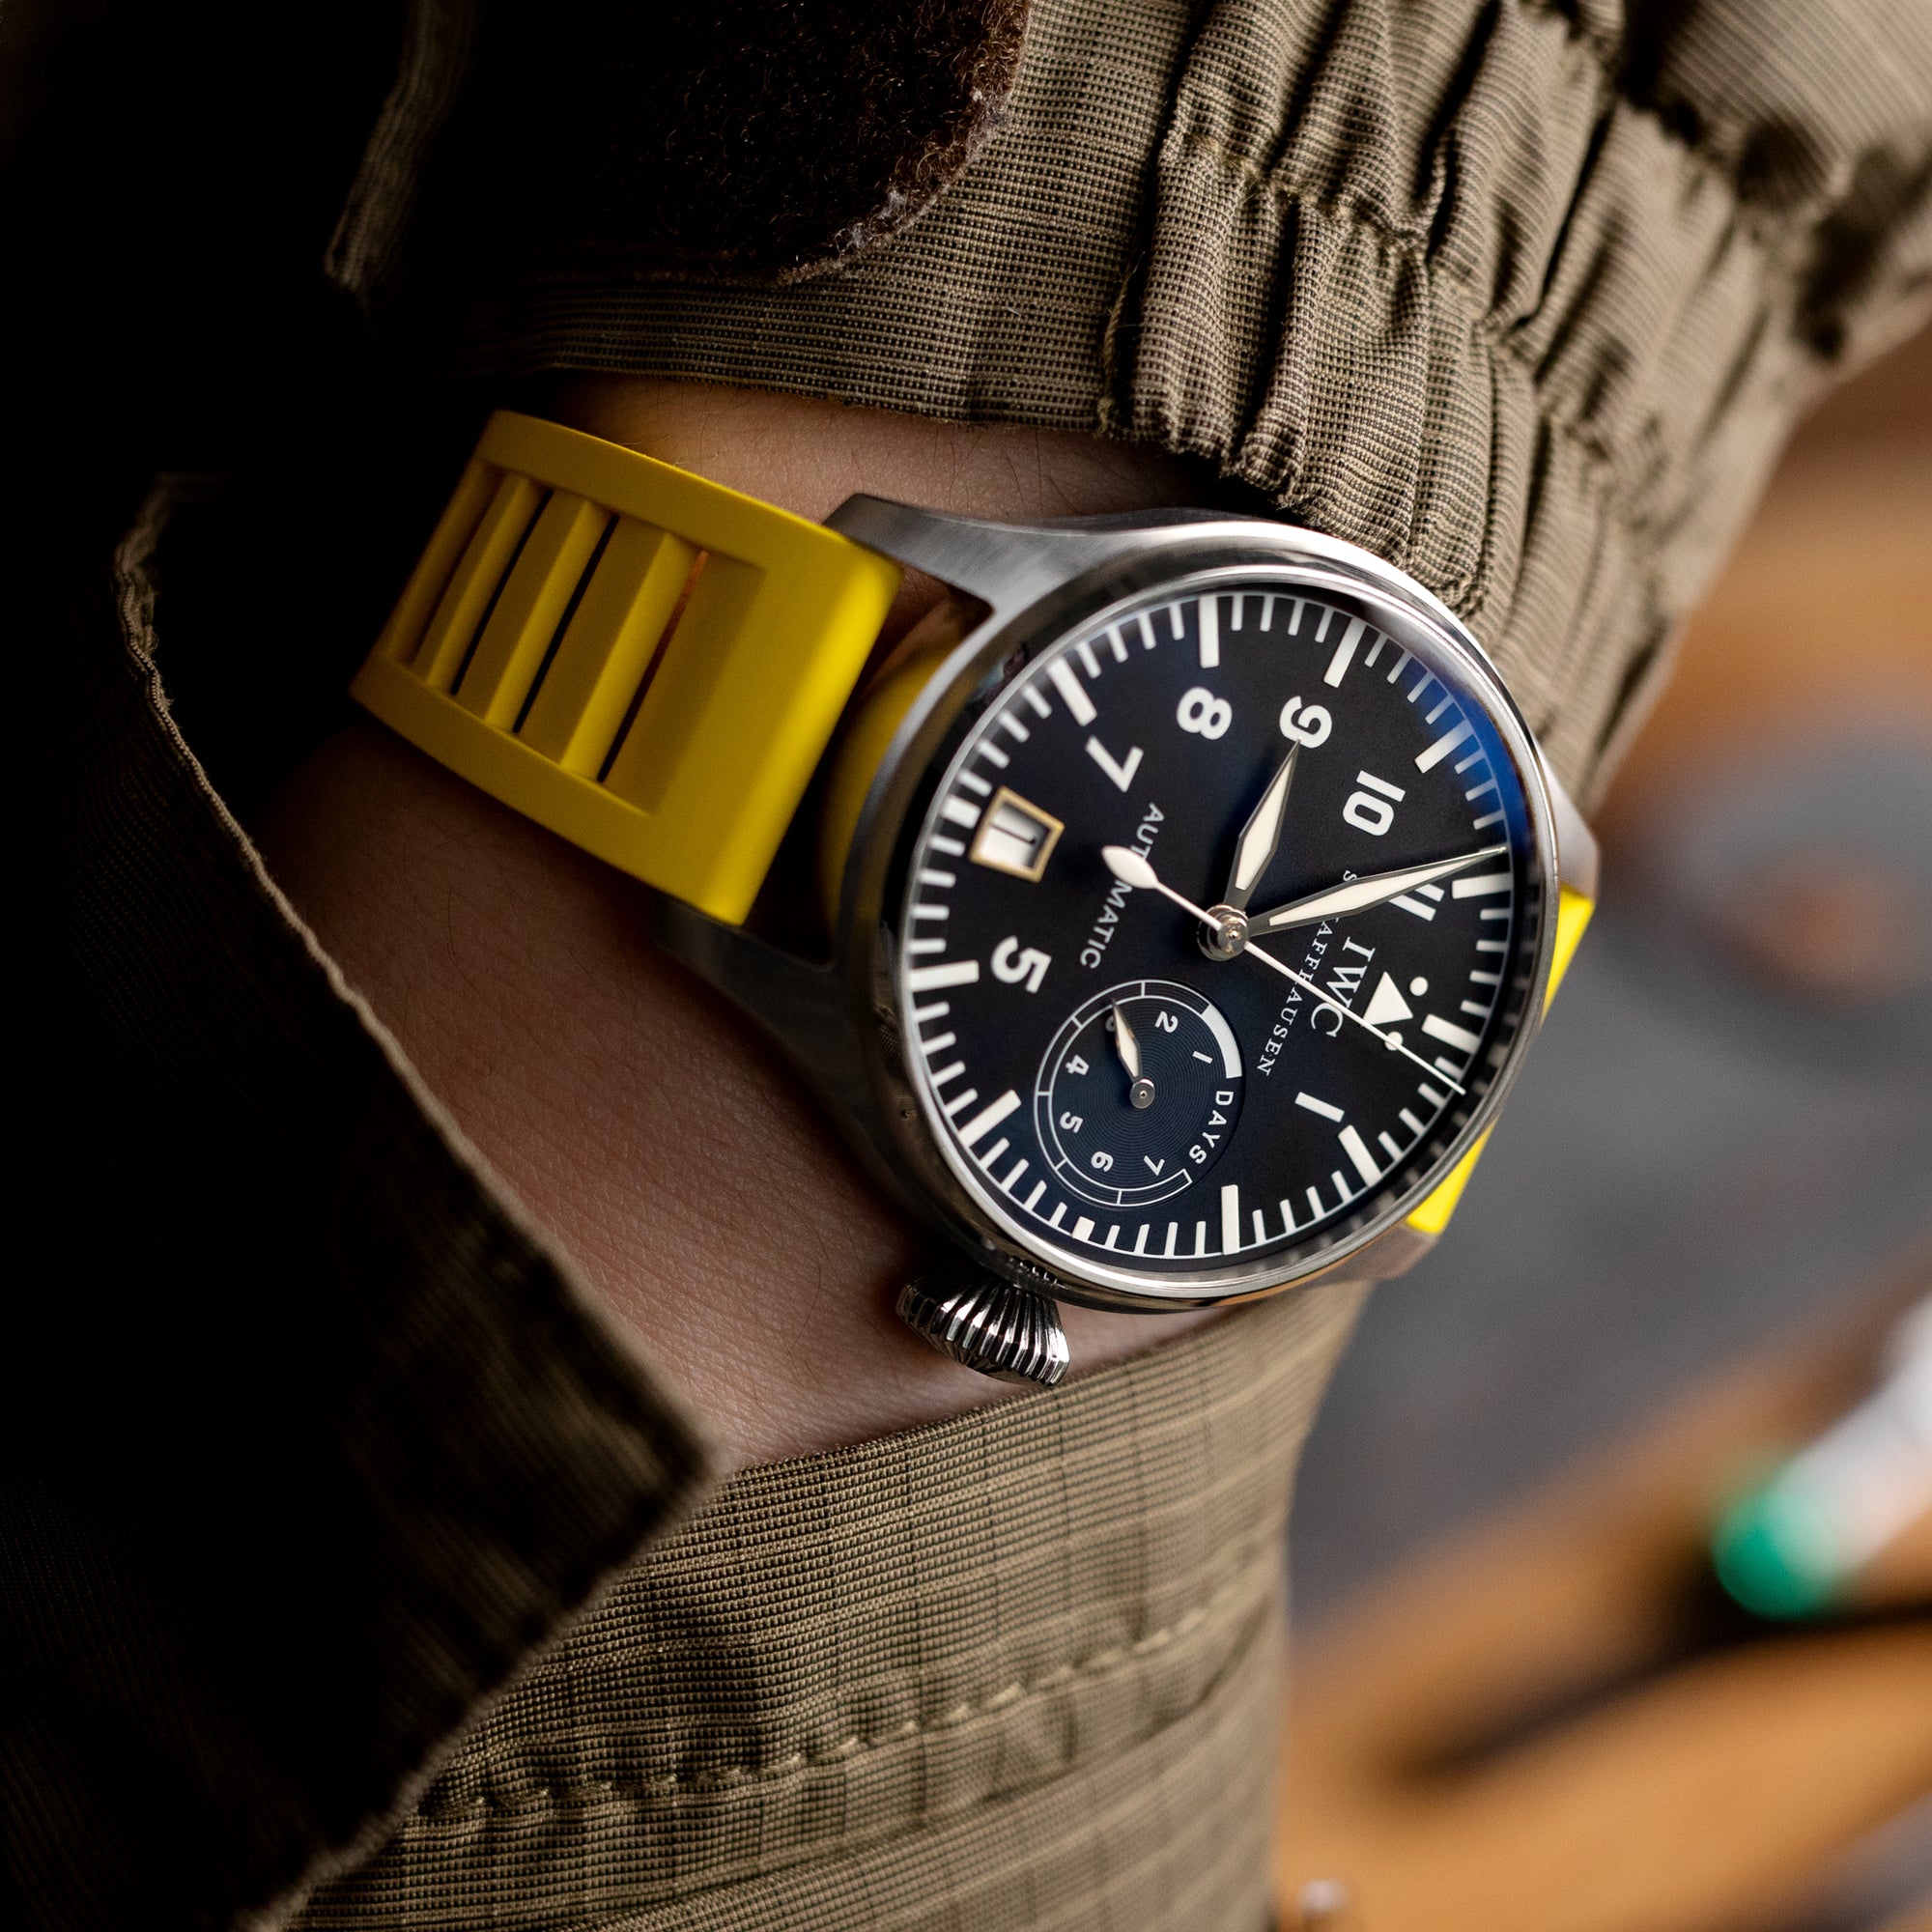 Yellow  Rubber Watch Strap by Strapcode is the perfect complement to the striking IWC Big Pilot watch 5002 